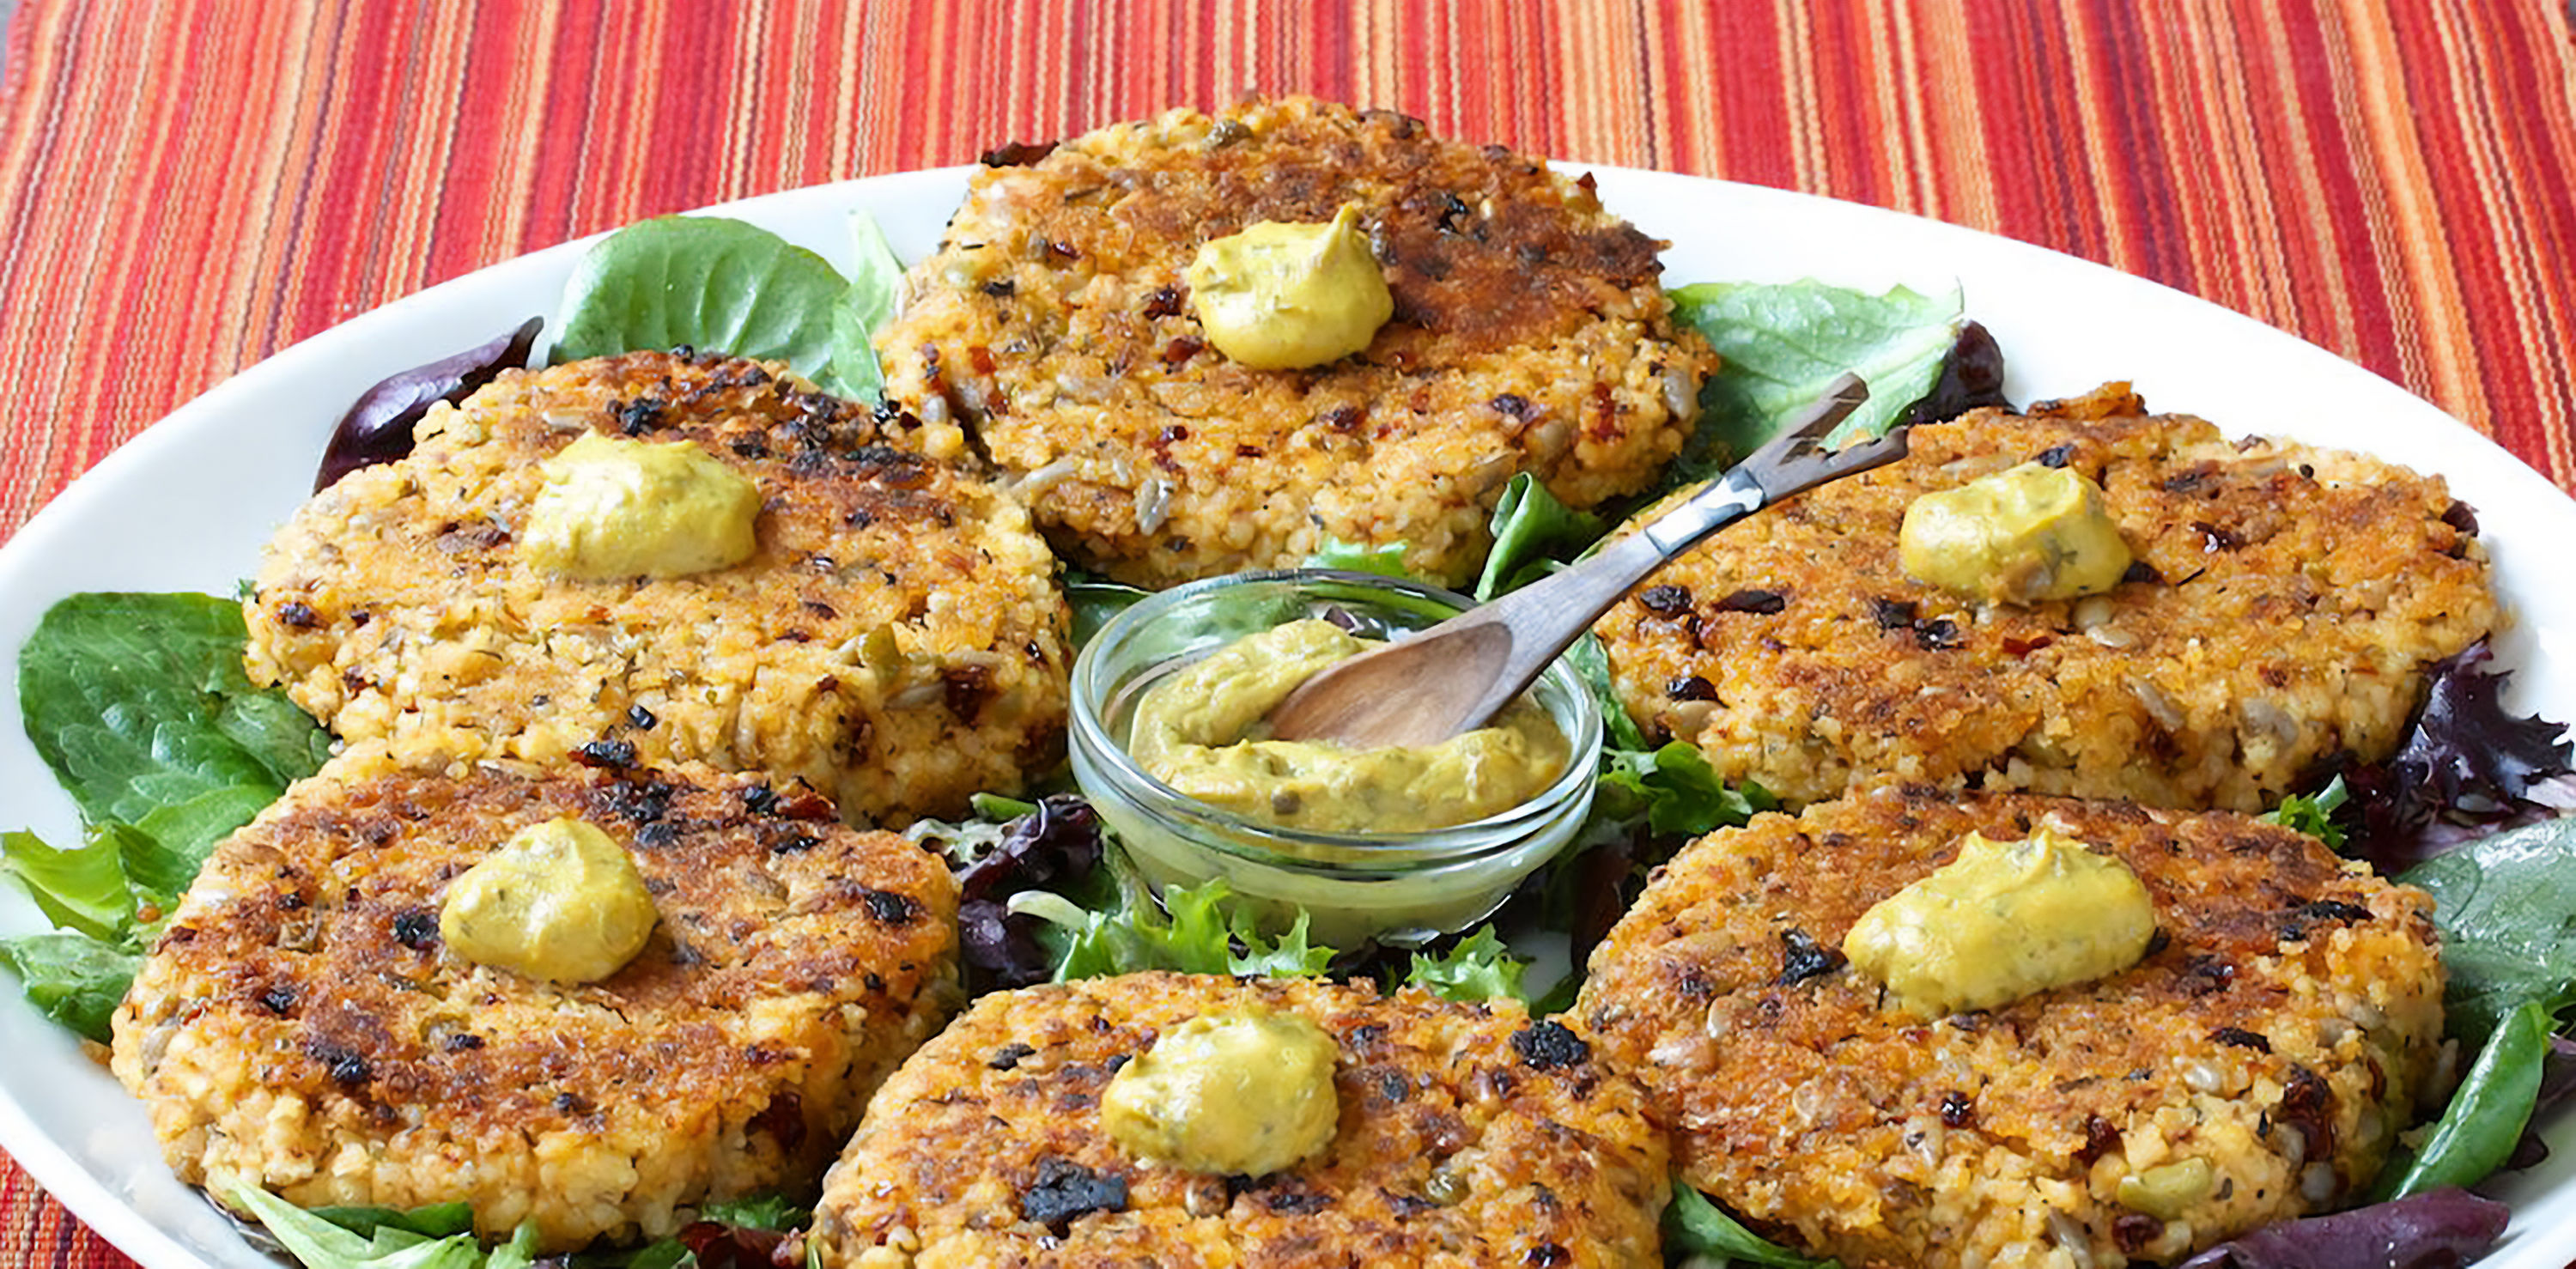 Millet cakes on a bed of vegetables, served with spicy mustard